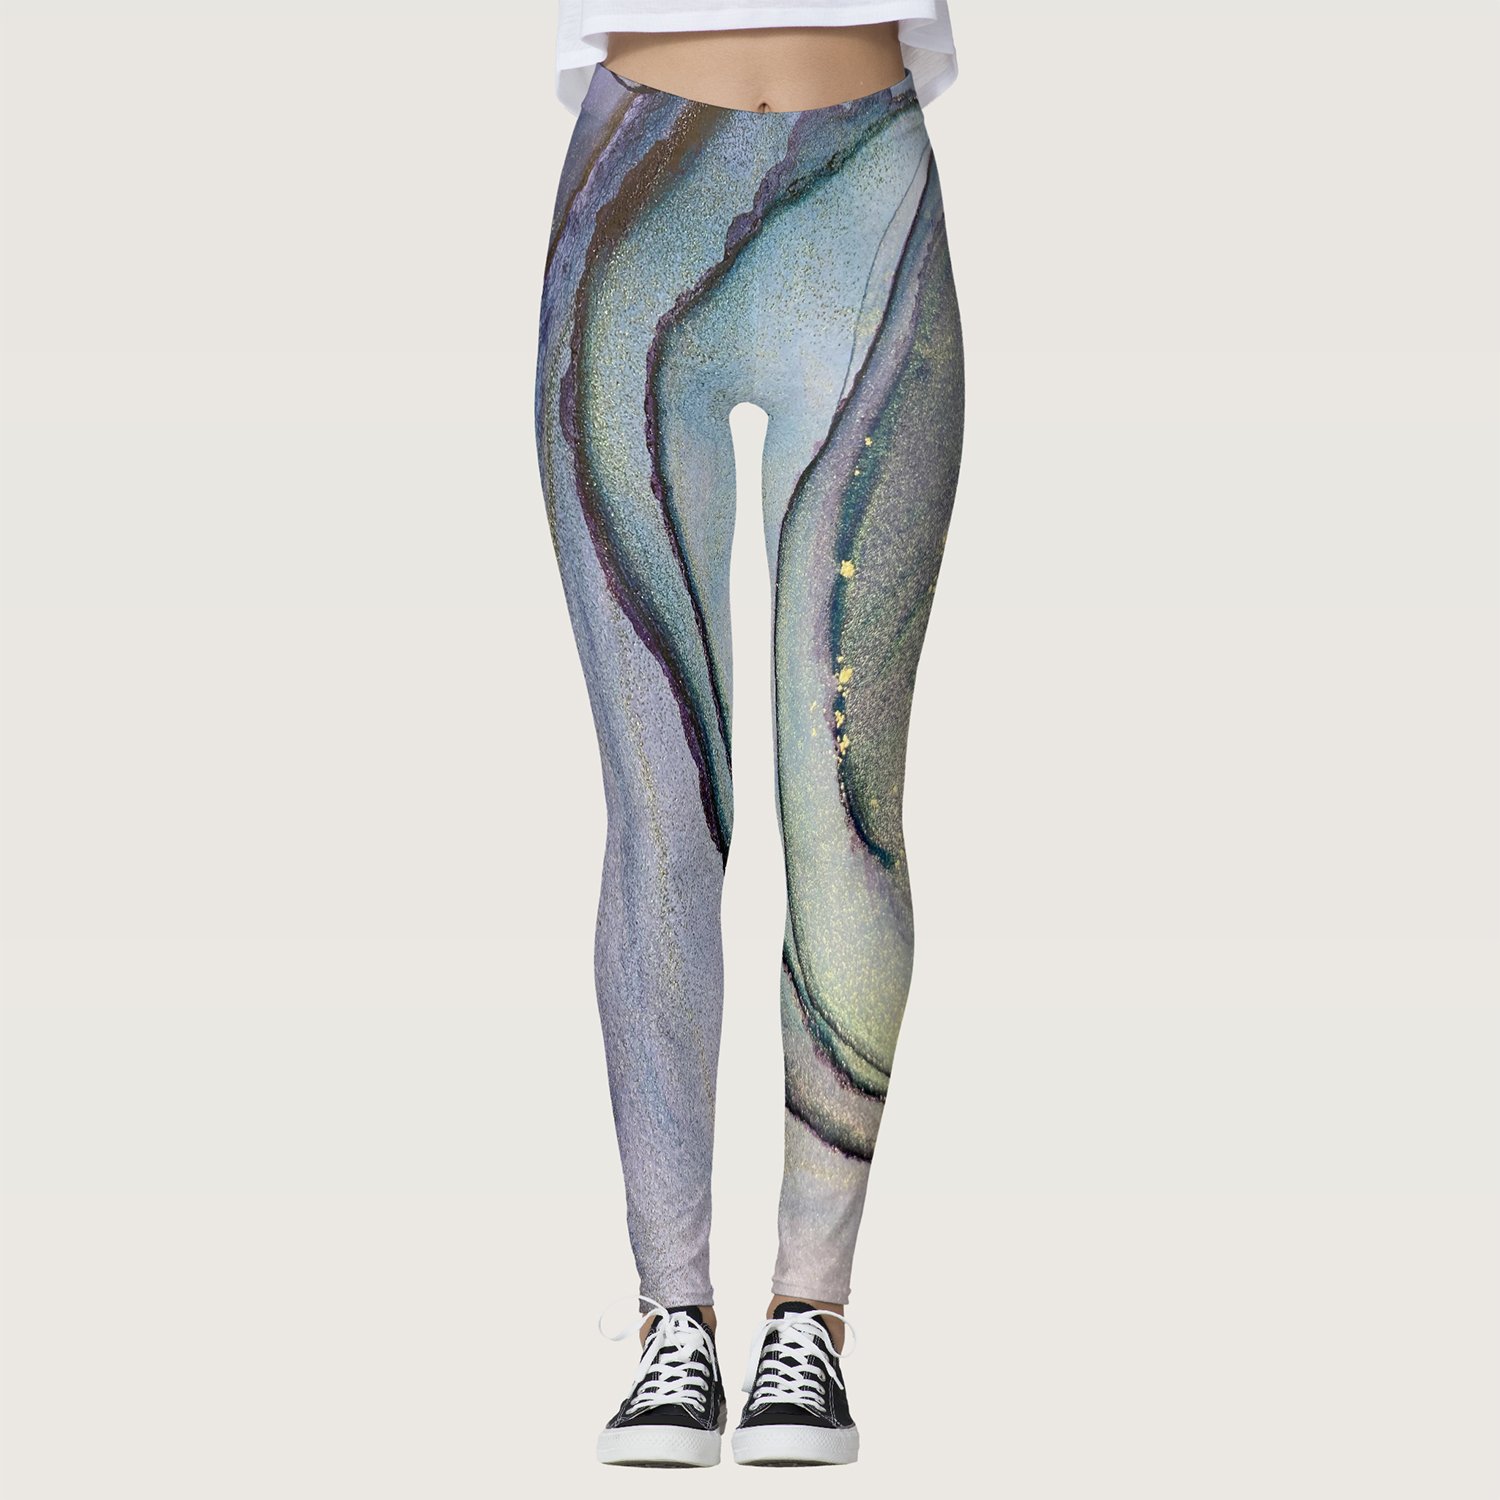 Faux Shimmery Alcohol Ink-Based Leggings (Copy)